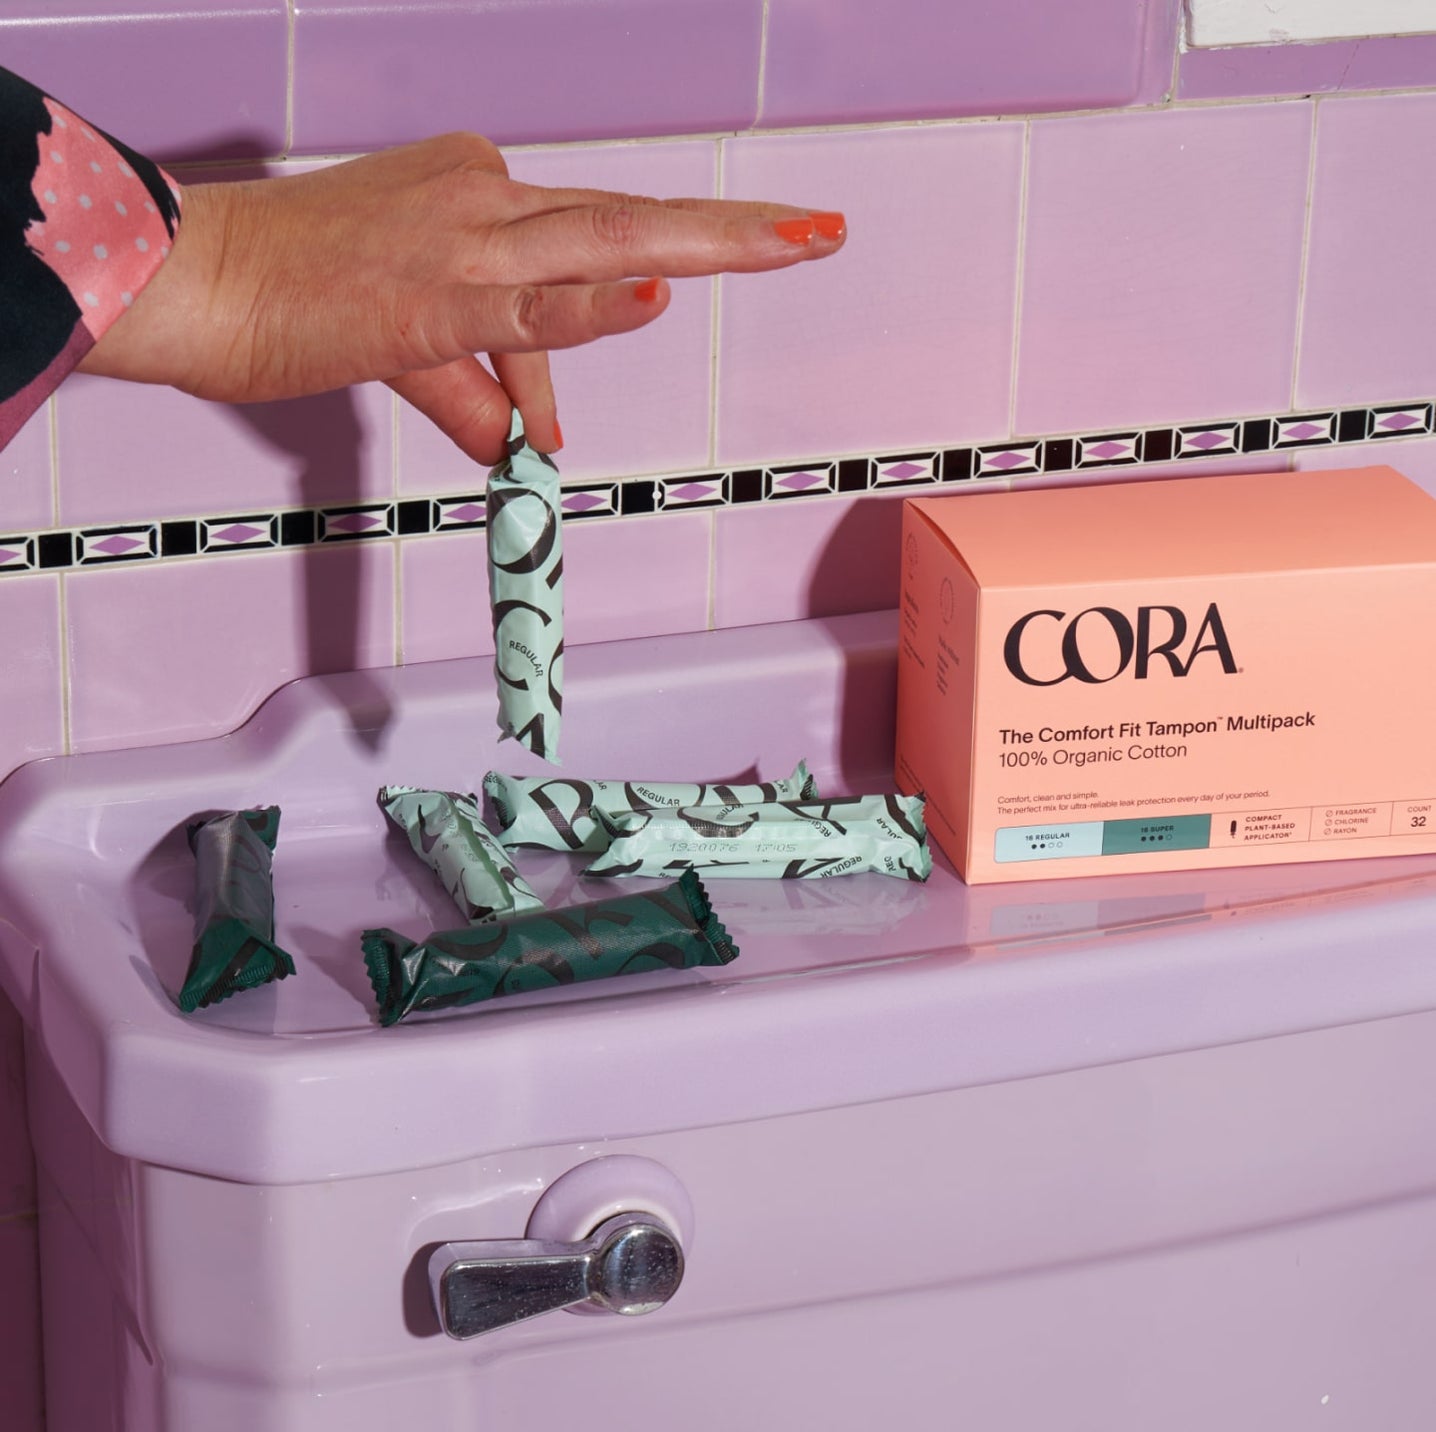 Period Care Brand Cora Unveils New Look And Expanded Wellness